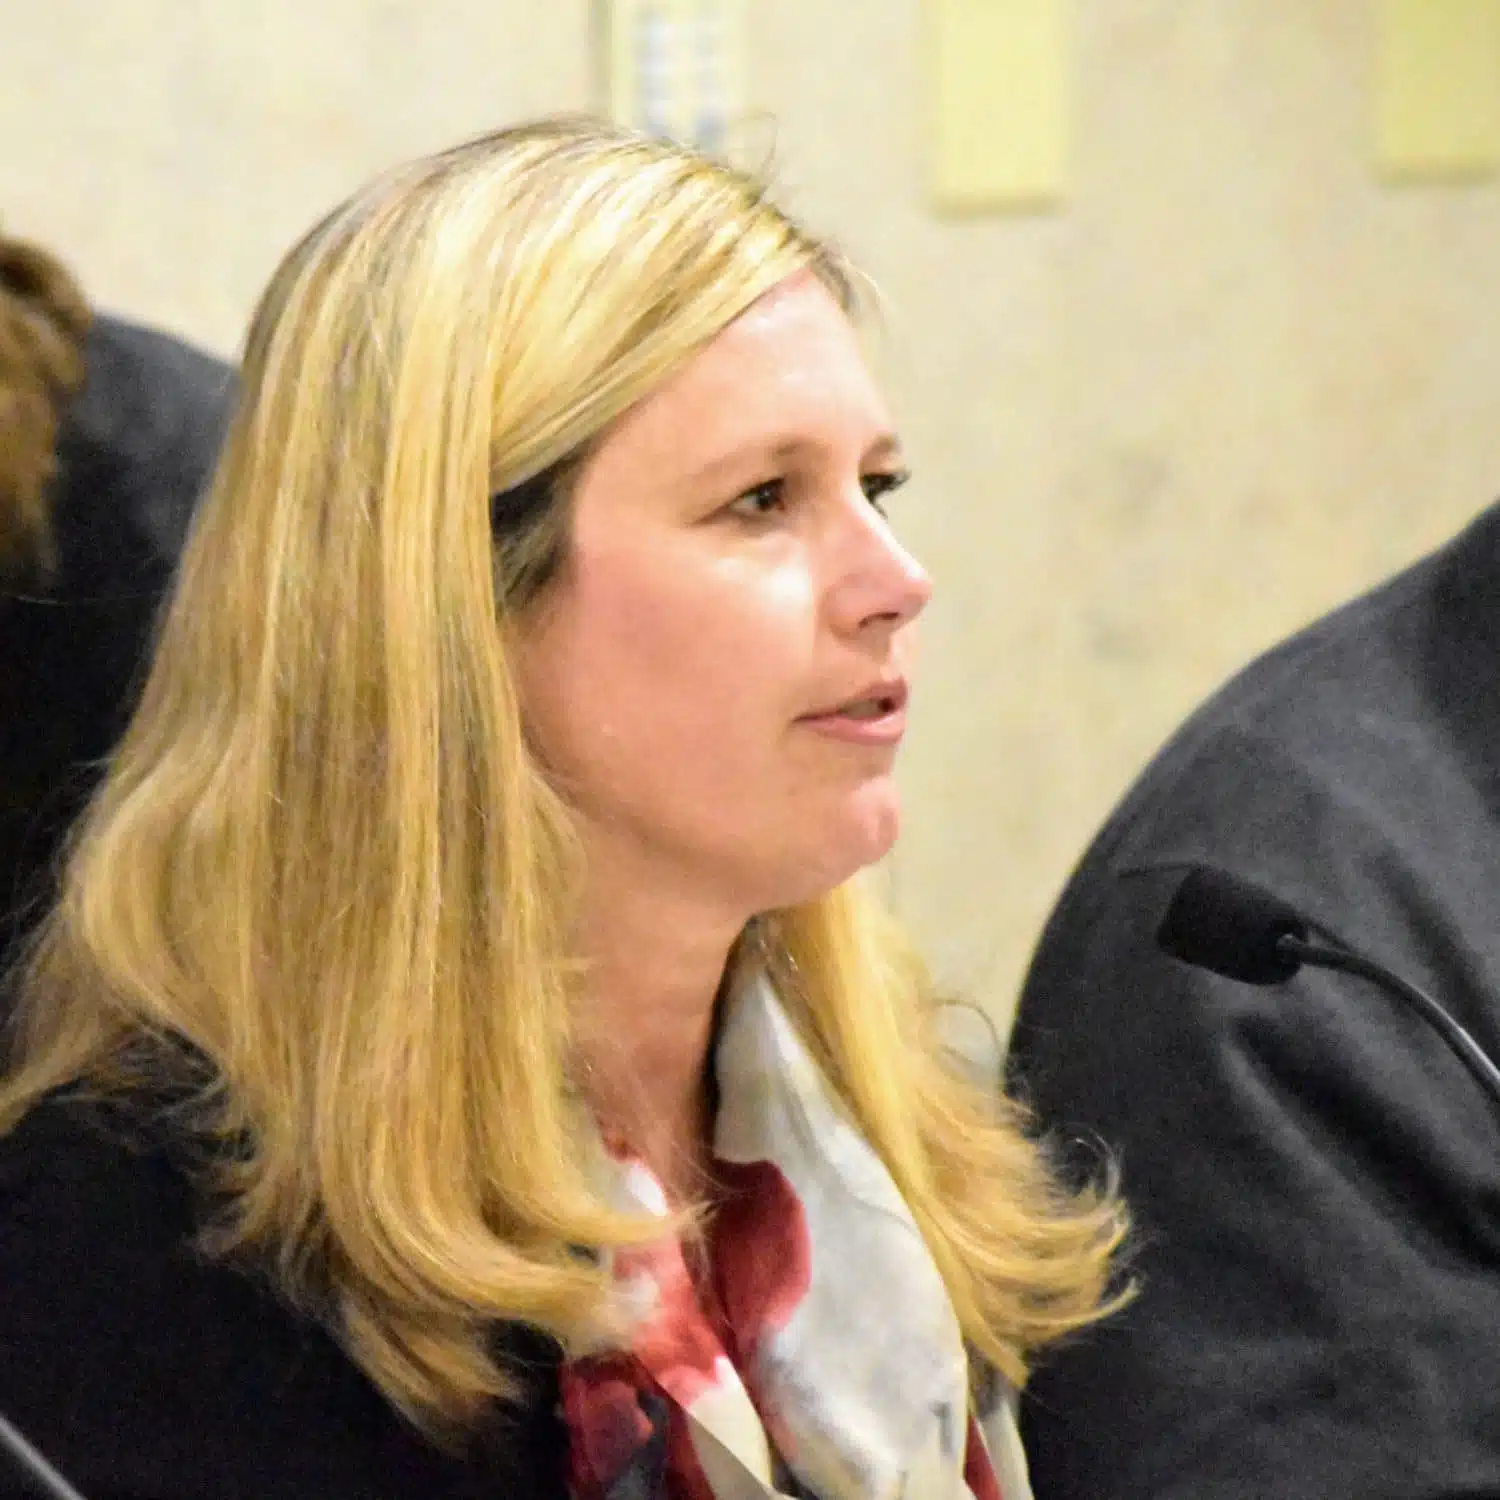 The apparent conflict of interest between National Grid and CRMC Chair Jennifer Cervenka